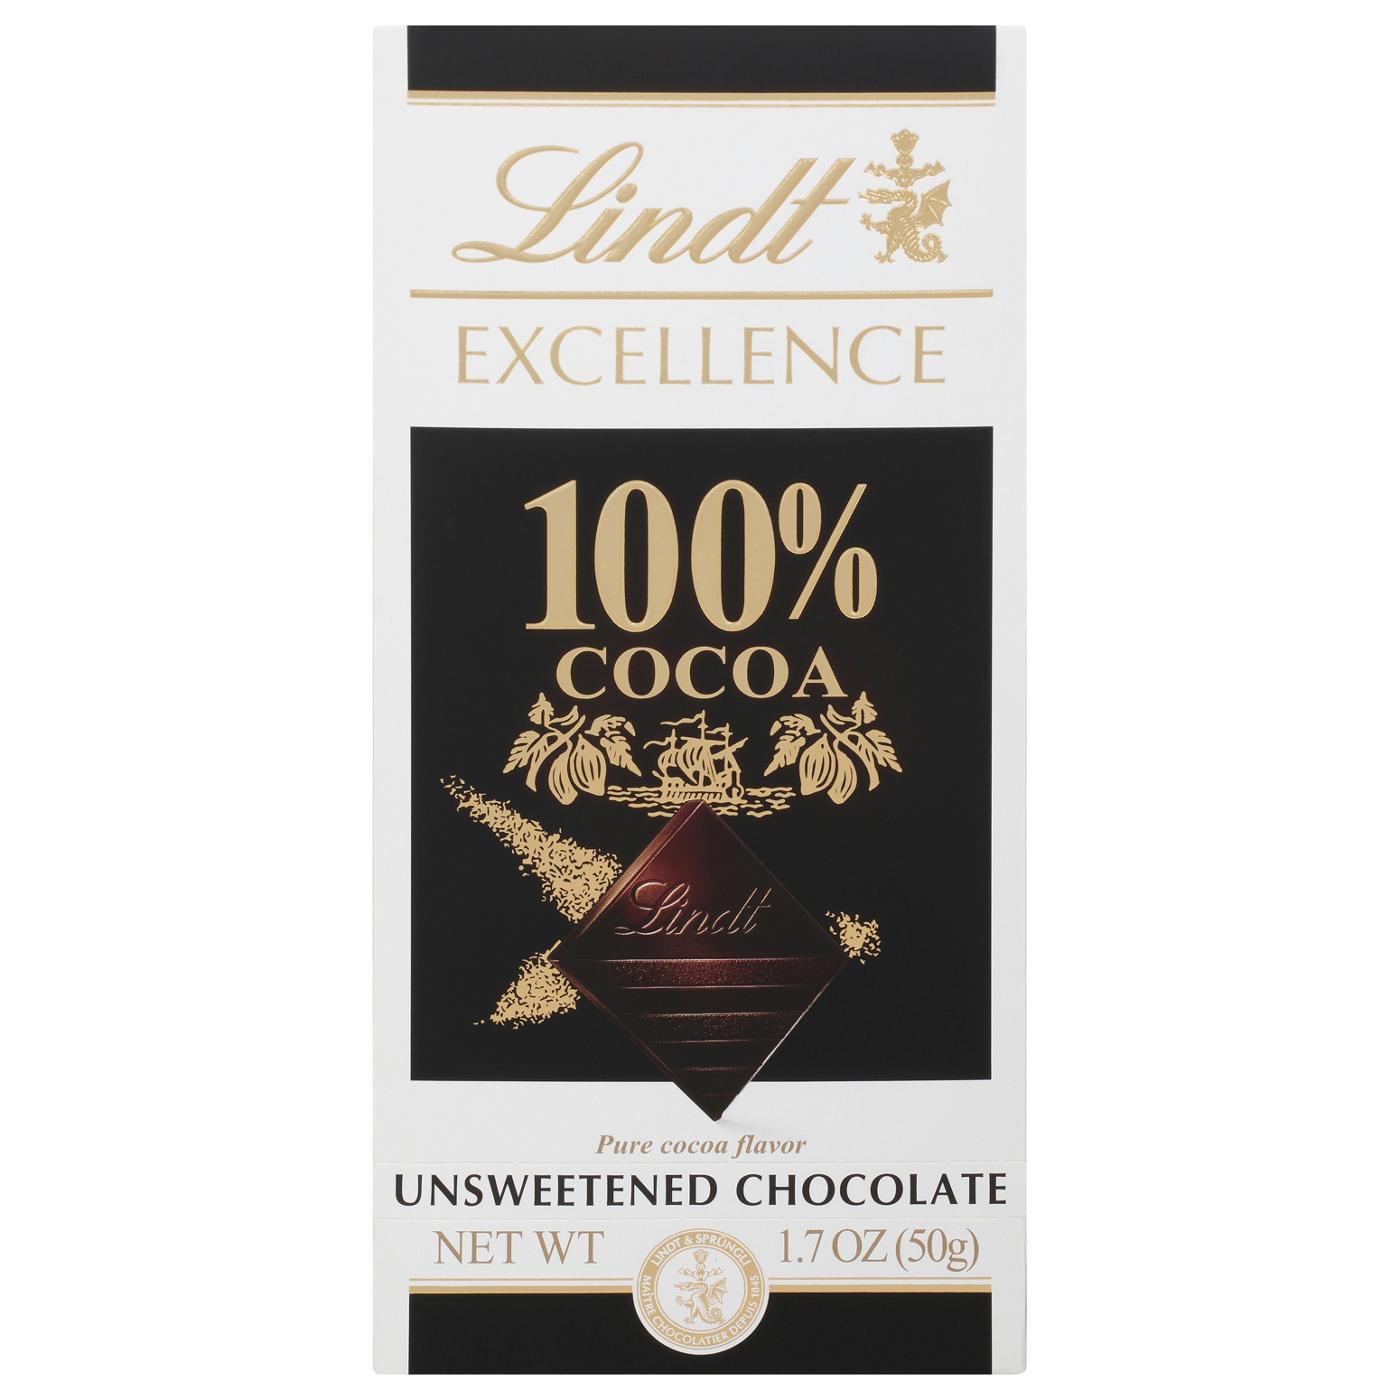 Lindt Excellence 100% Cocoa Dark Chocolate Bar; image 1 of 2